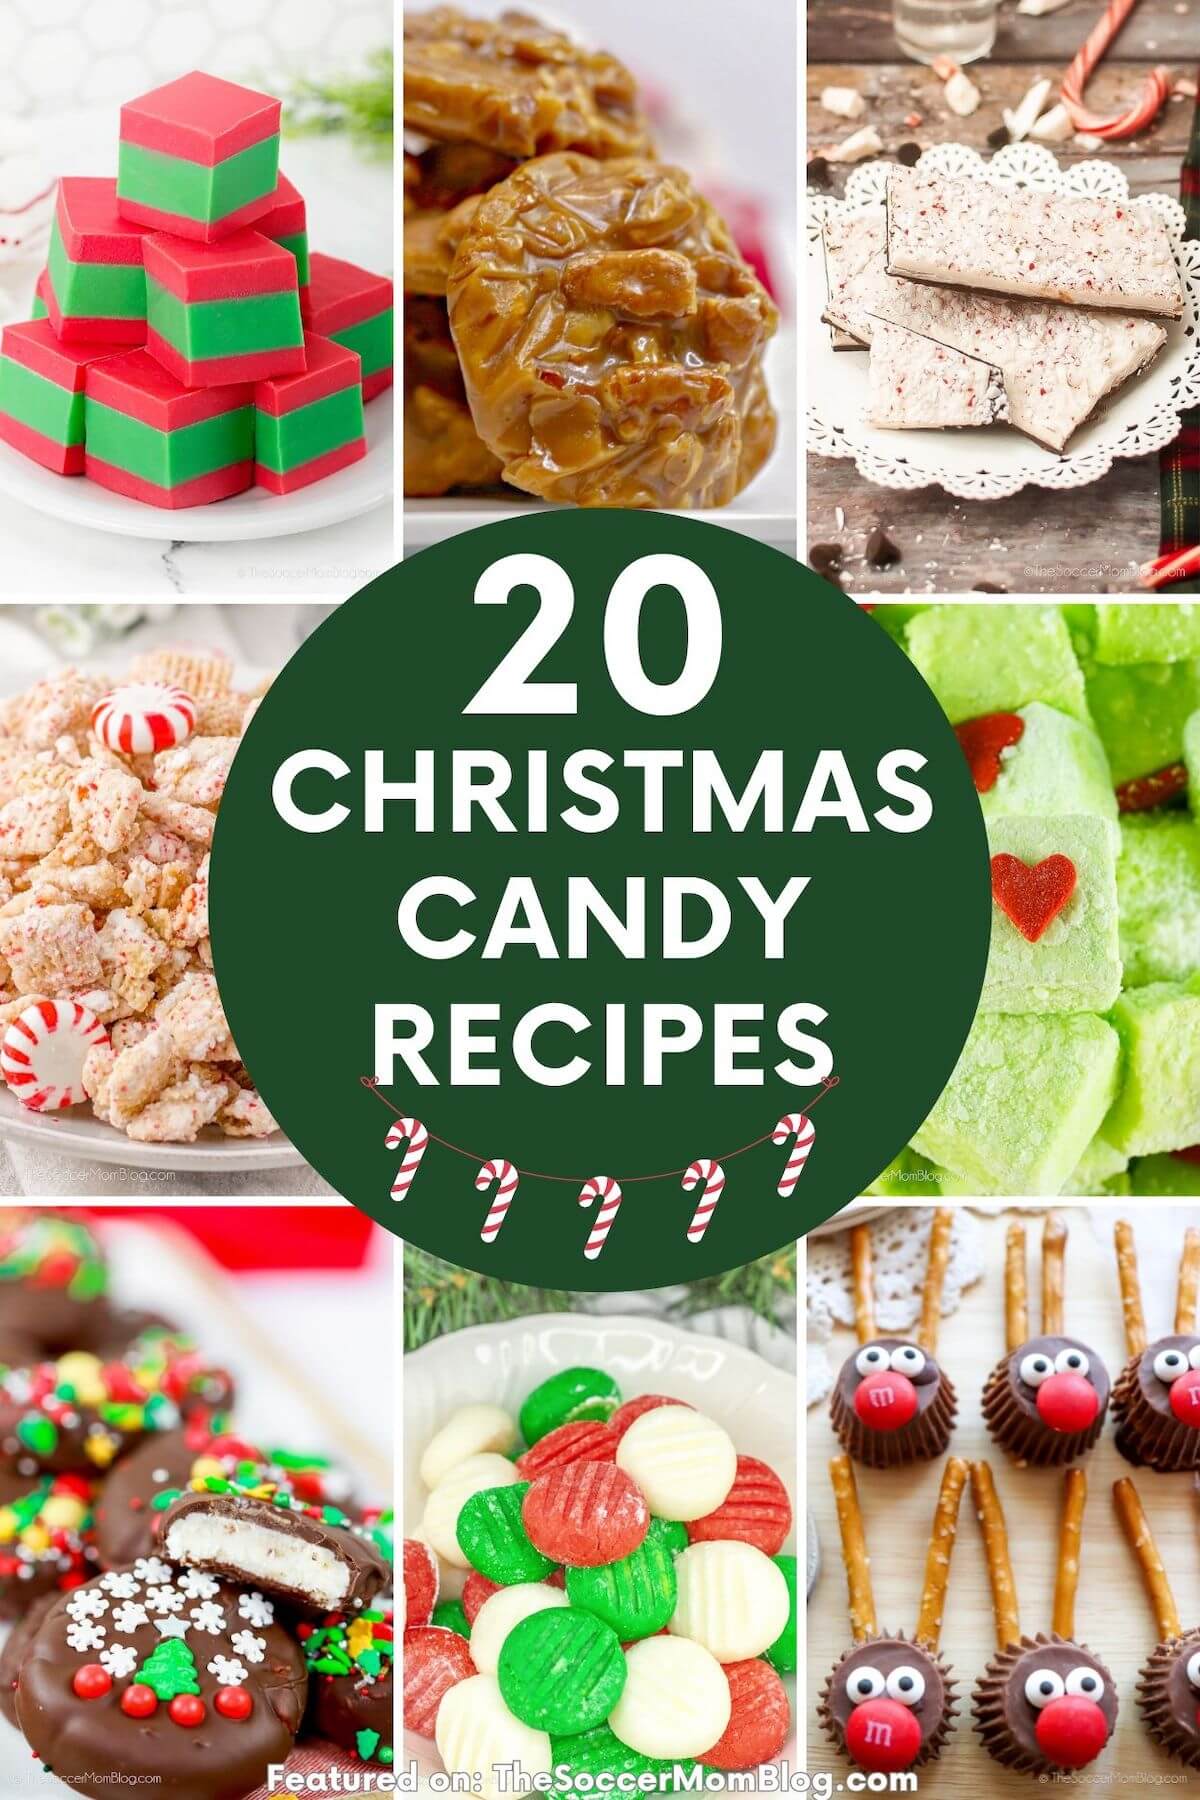 collage of homemade holiday candy recipes, text overlay "20 Christmas Candy Recipes".